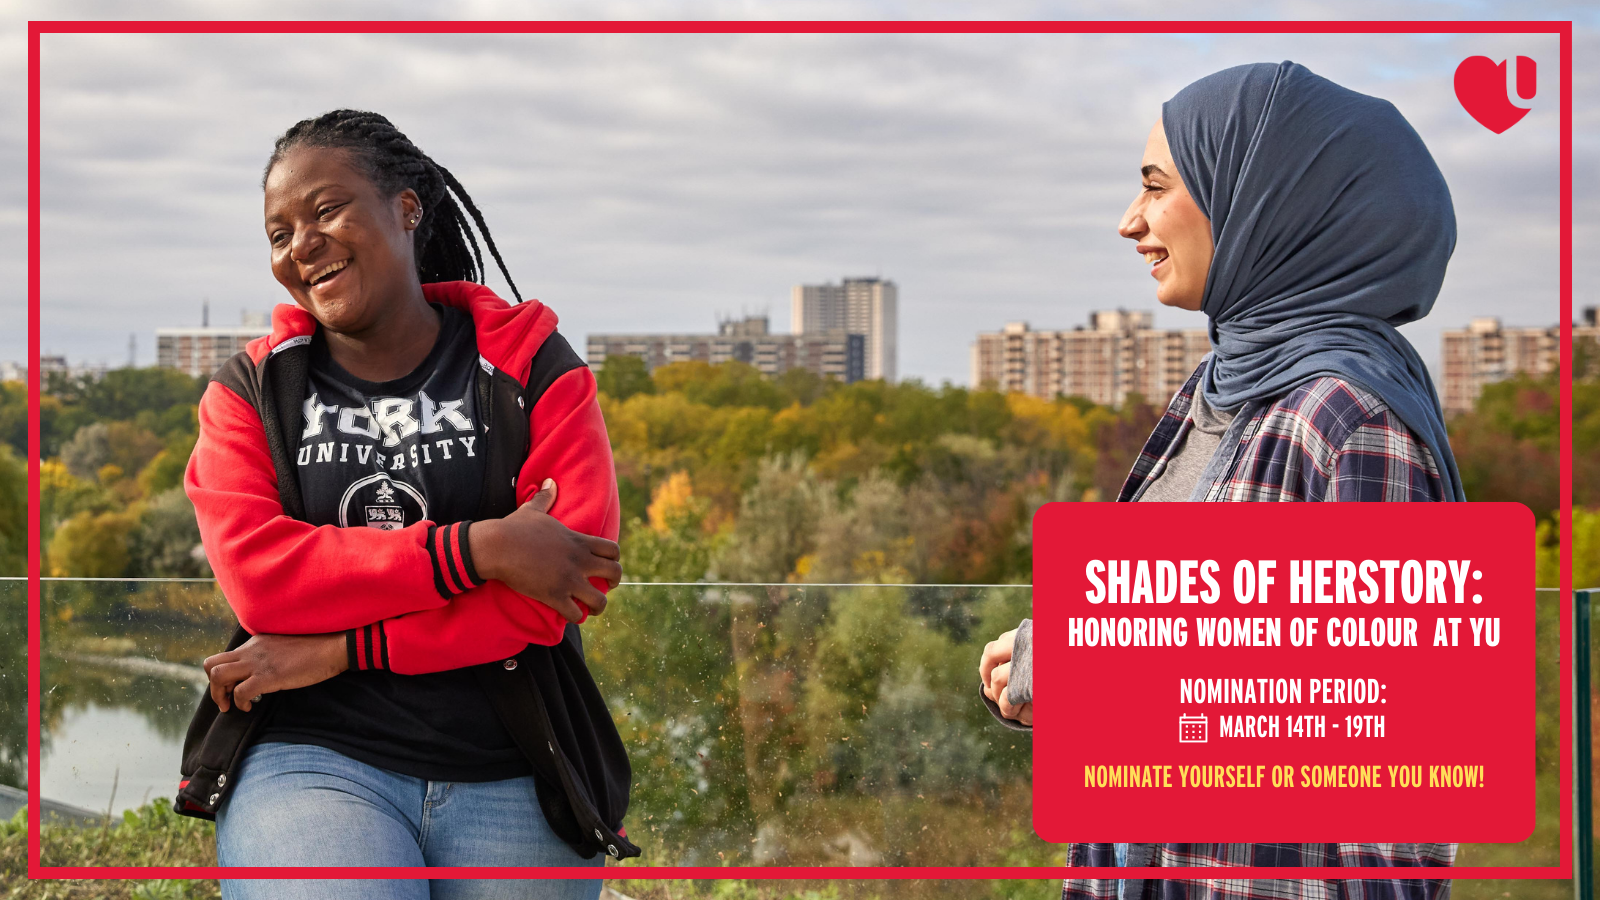 Image of 2 students smiling in front of trees. Red textbook in bottom right corner states Shades of Herstory: Honoring Women of Colour at YU Nomination Period March 14-19. Nominate yourself or someone you know!